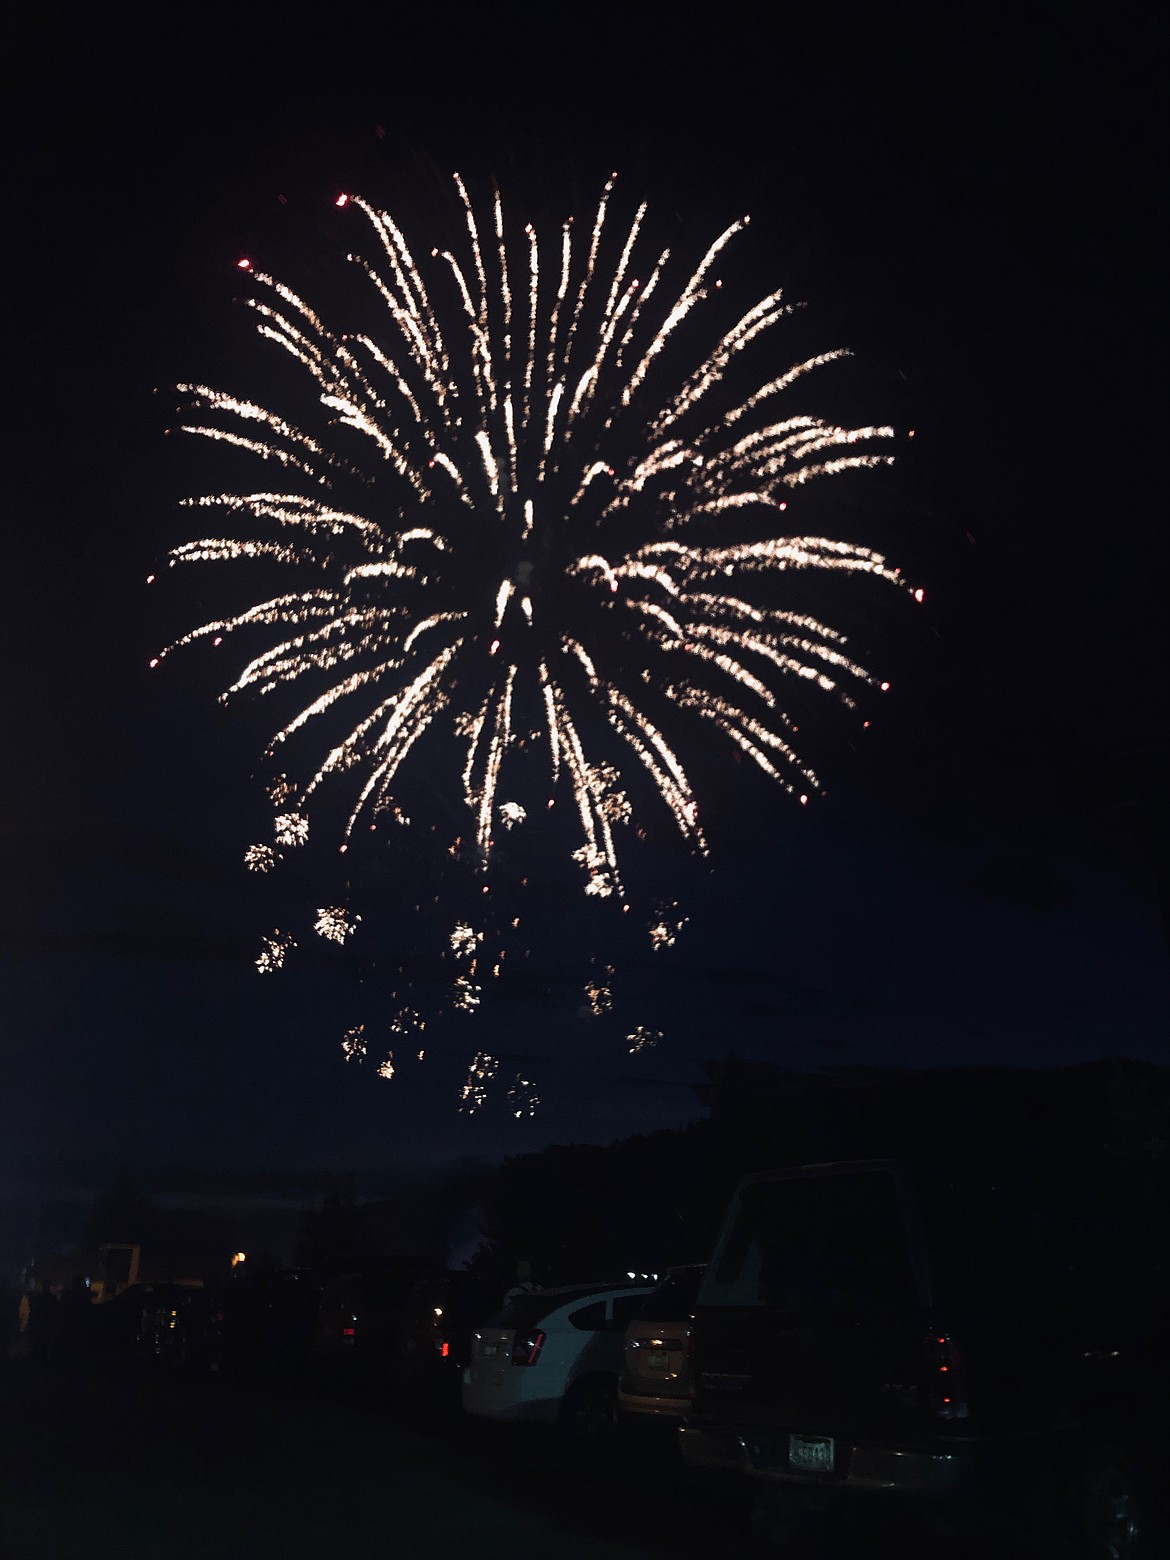 Photo by RADLEY GROTH
Rows of spectators parked behind McKinley Avenue to watch the Silver Mountain Fireworks Show.